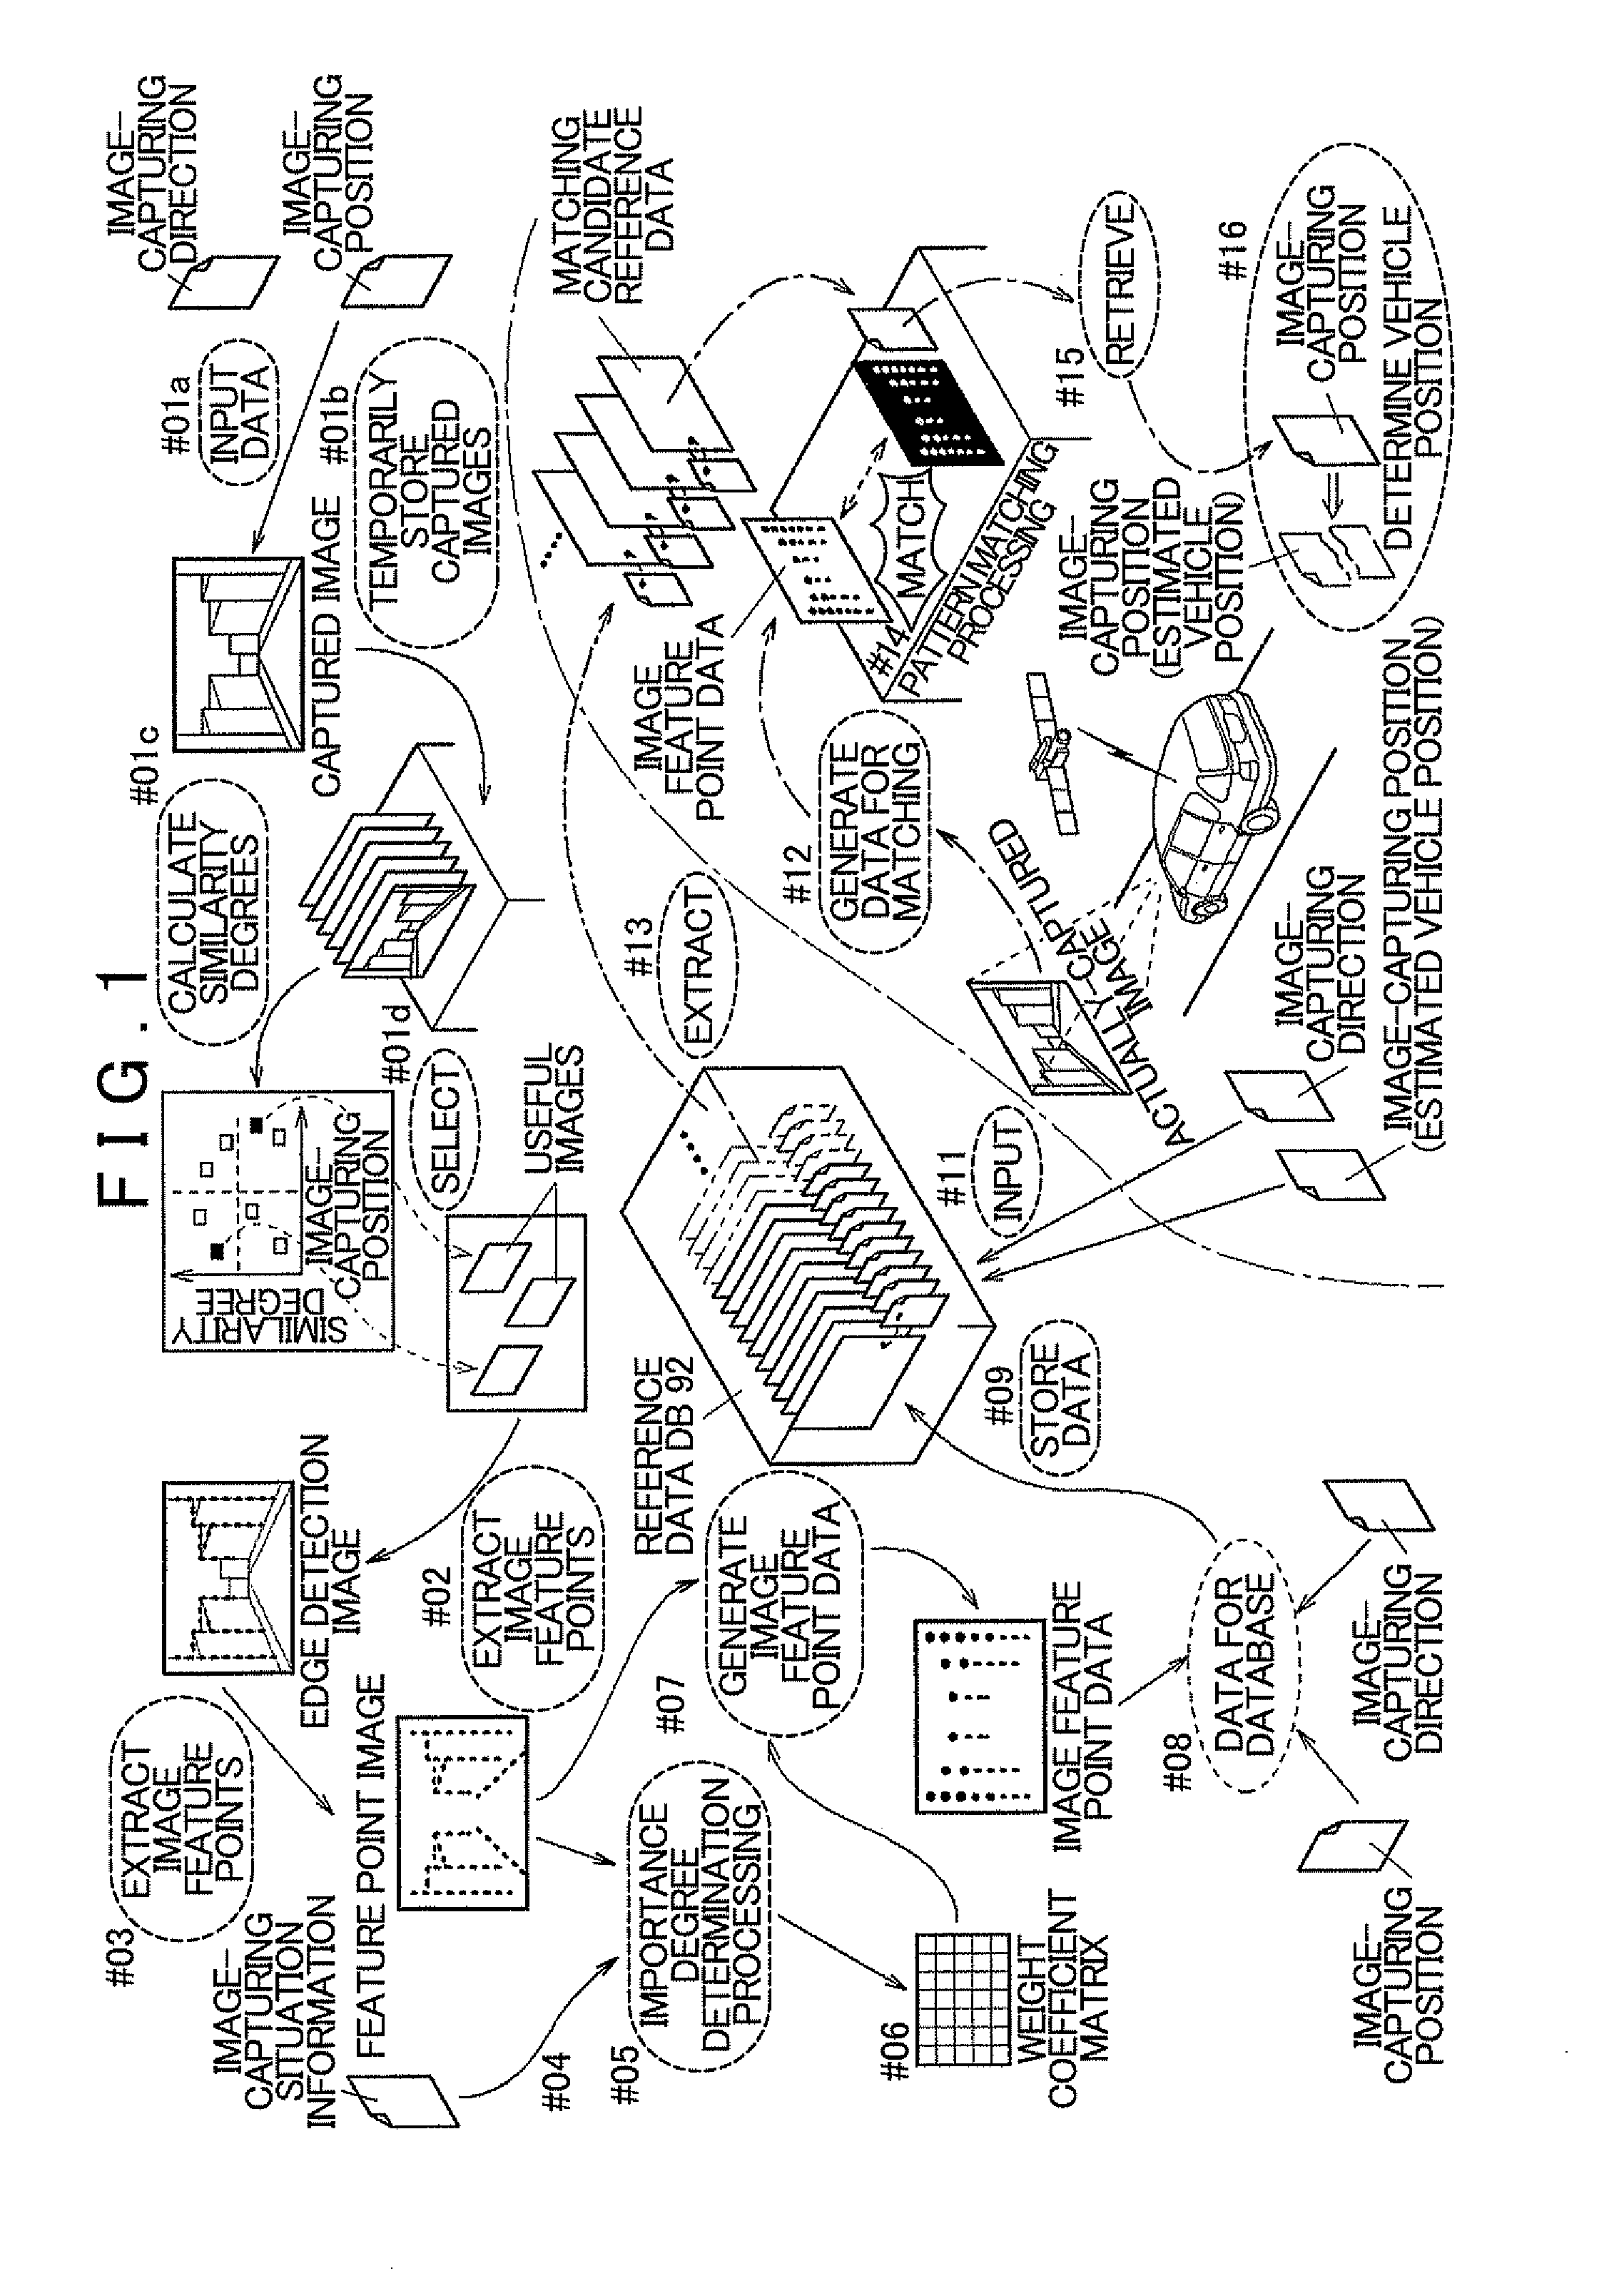 Image processing system and position measurement system